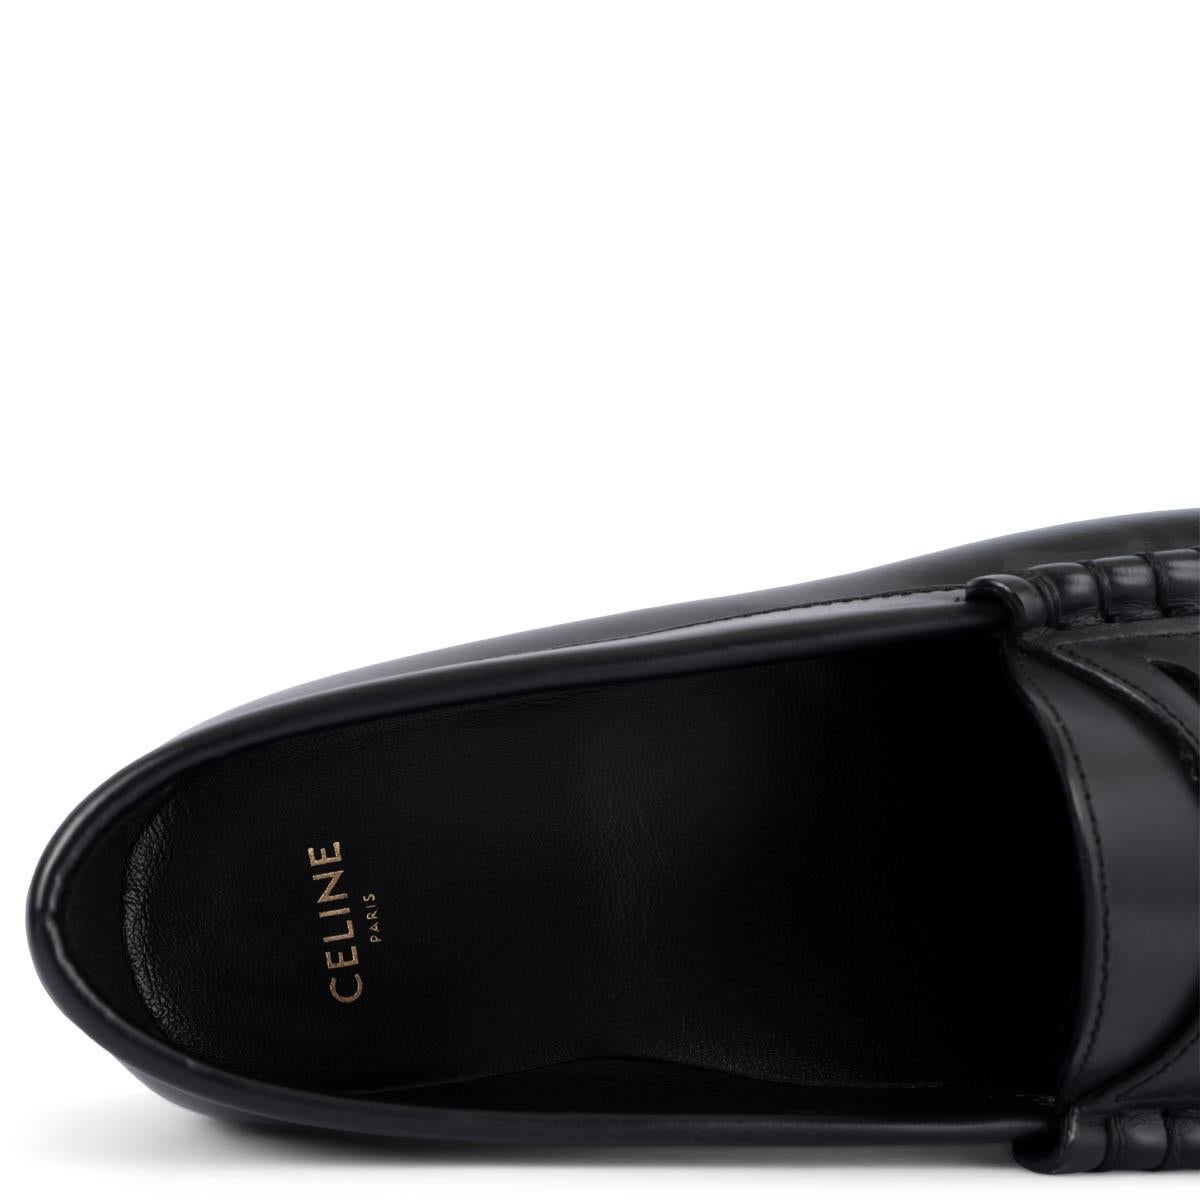 CELINE black leather LUCO Loafers Shoes 38.5 1